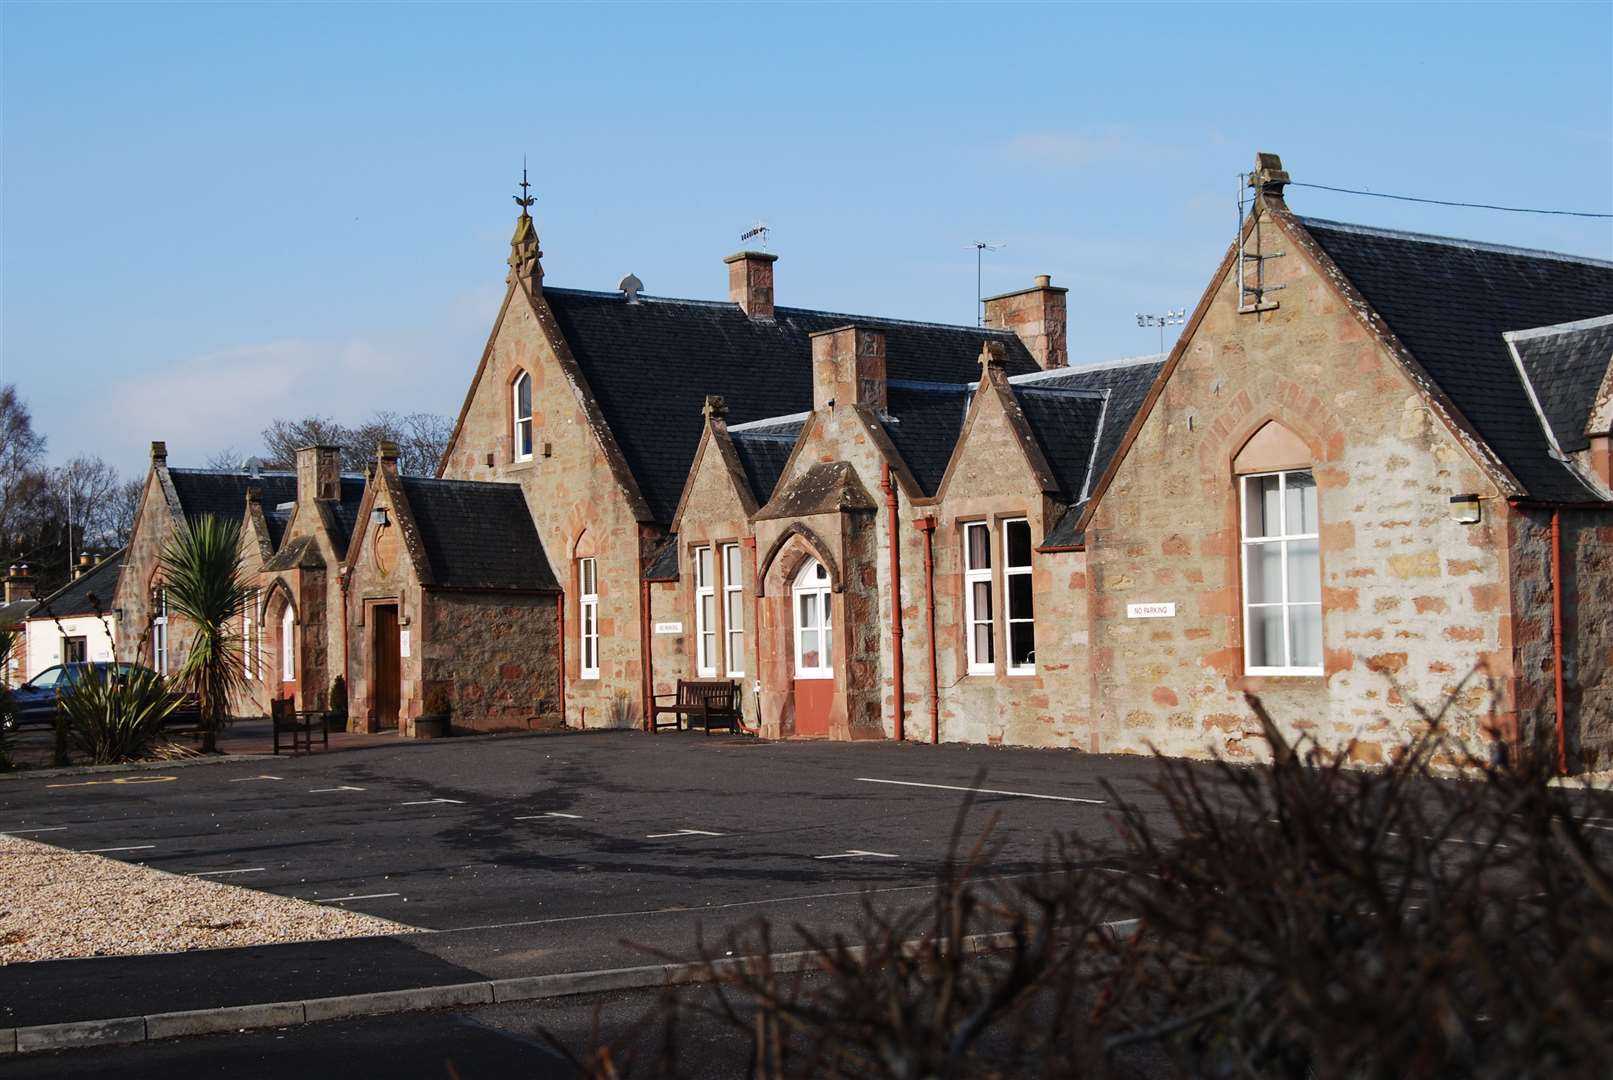 The Dingwall hospital continues to play a key role in the community today – and hasn't changed that much down the years.